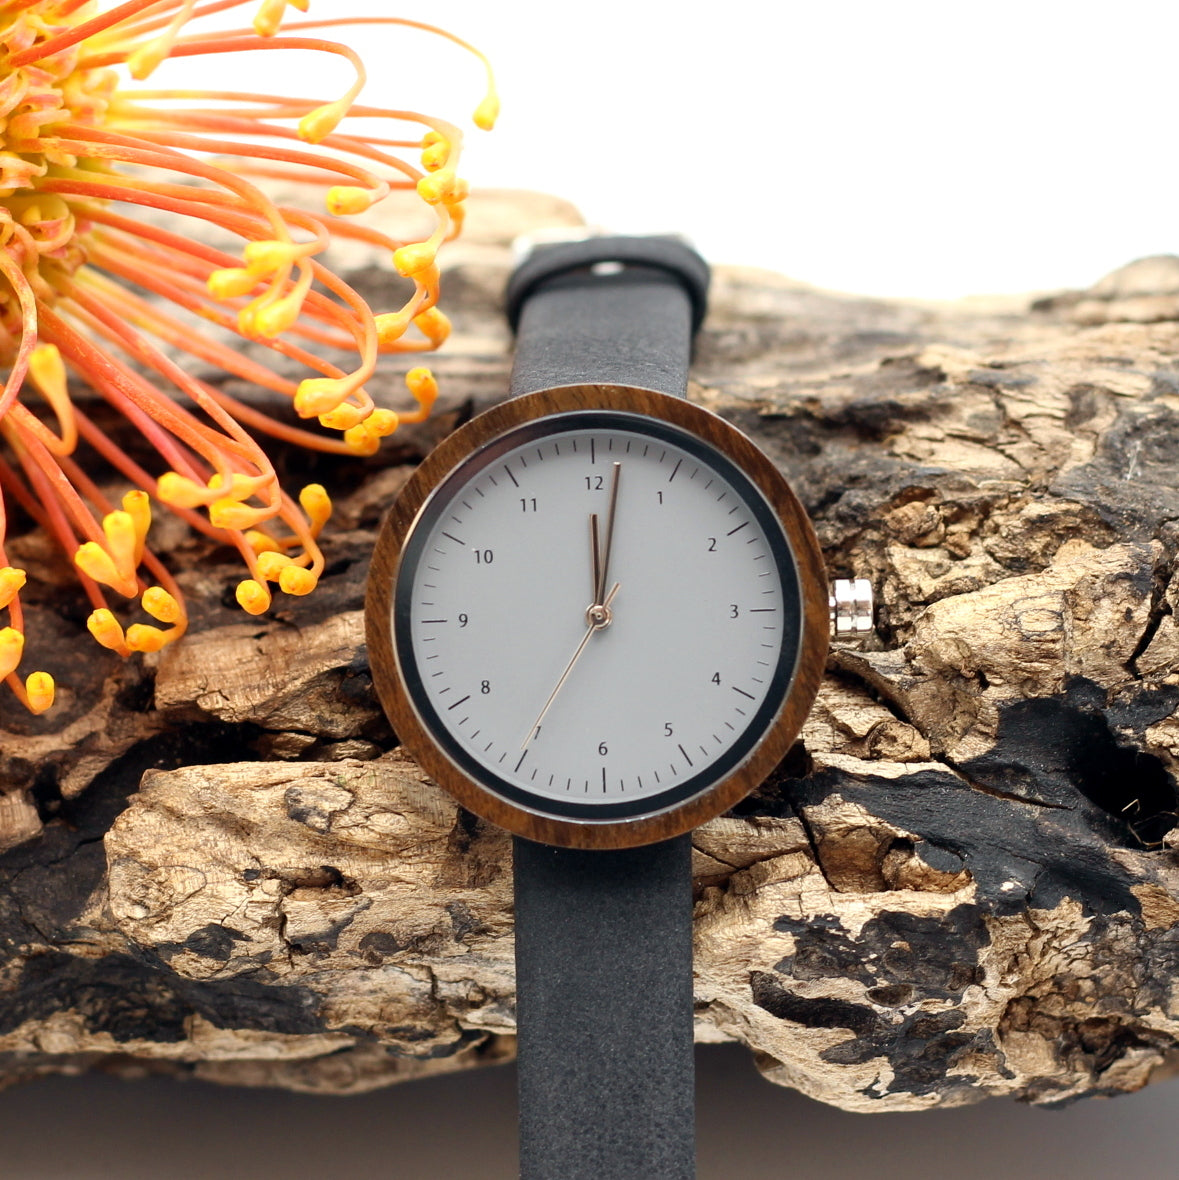 Kanso CUTIE Round Petite Wooden Watch ebony wood with vegan leather black strap, make it personal and engrave a message on the back. Shipping only R59.